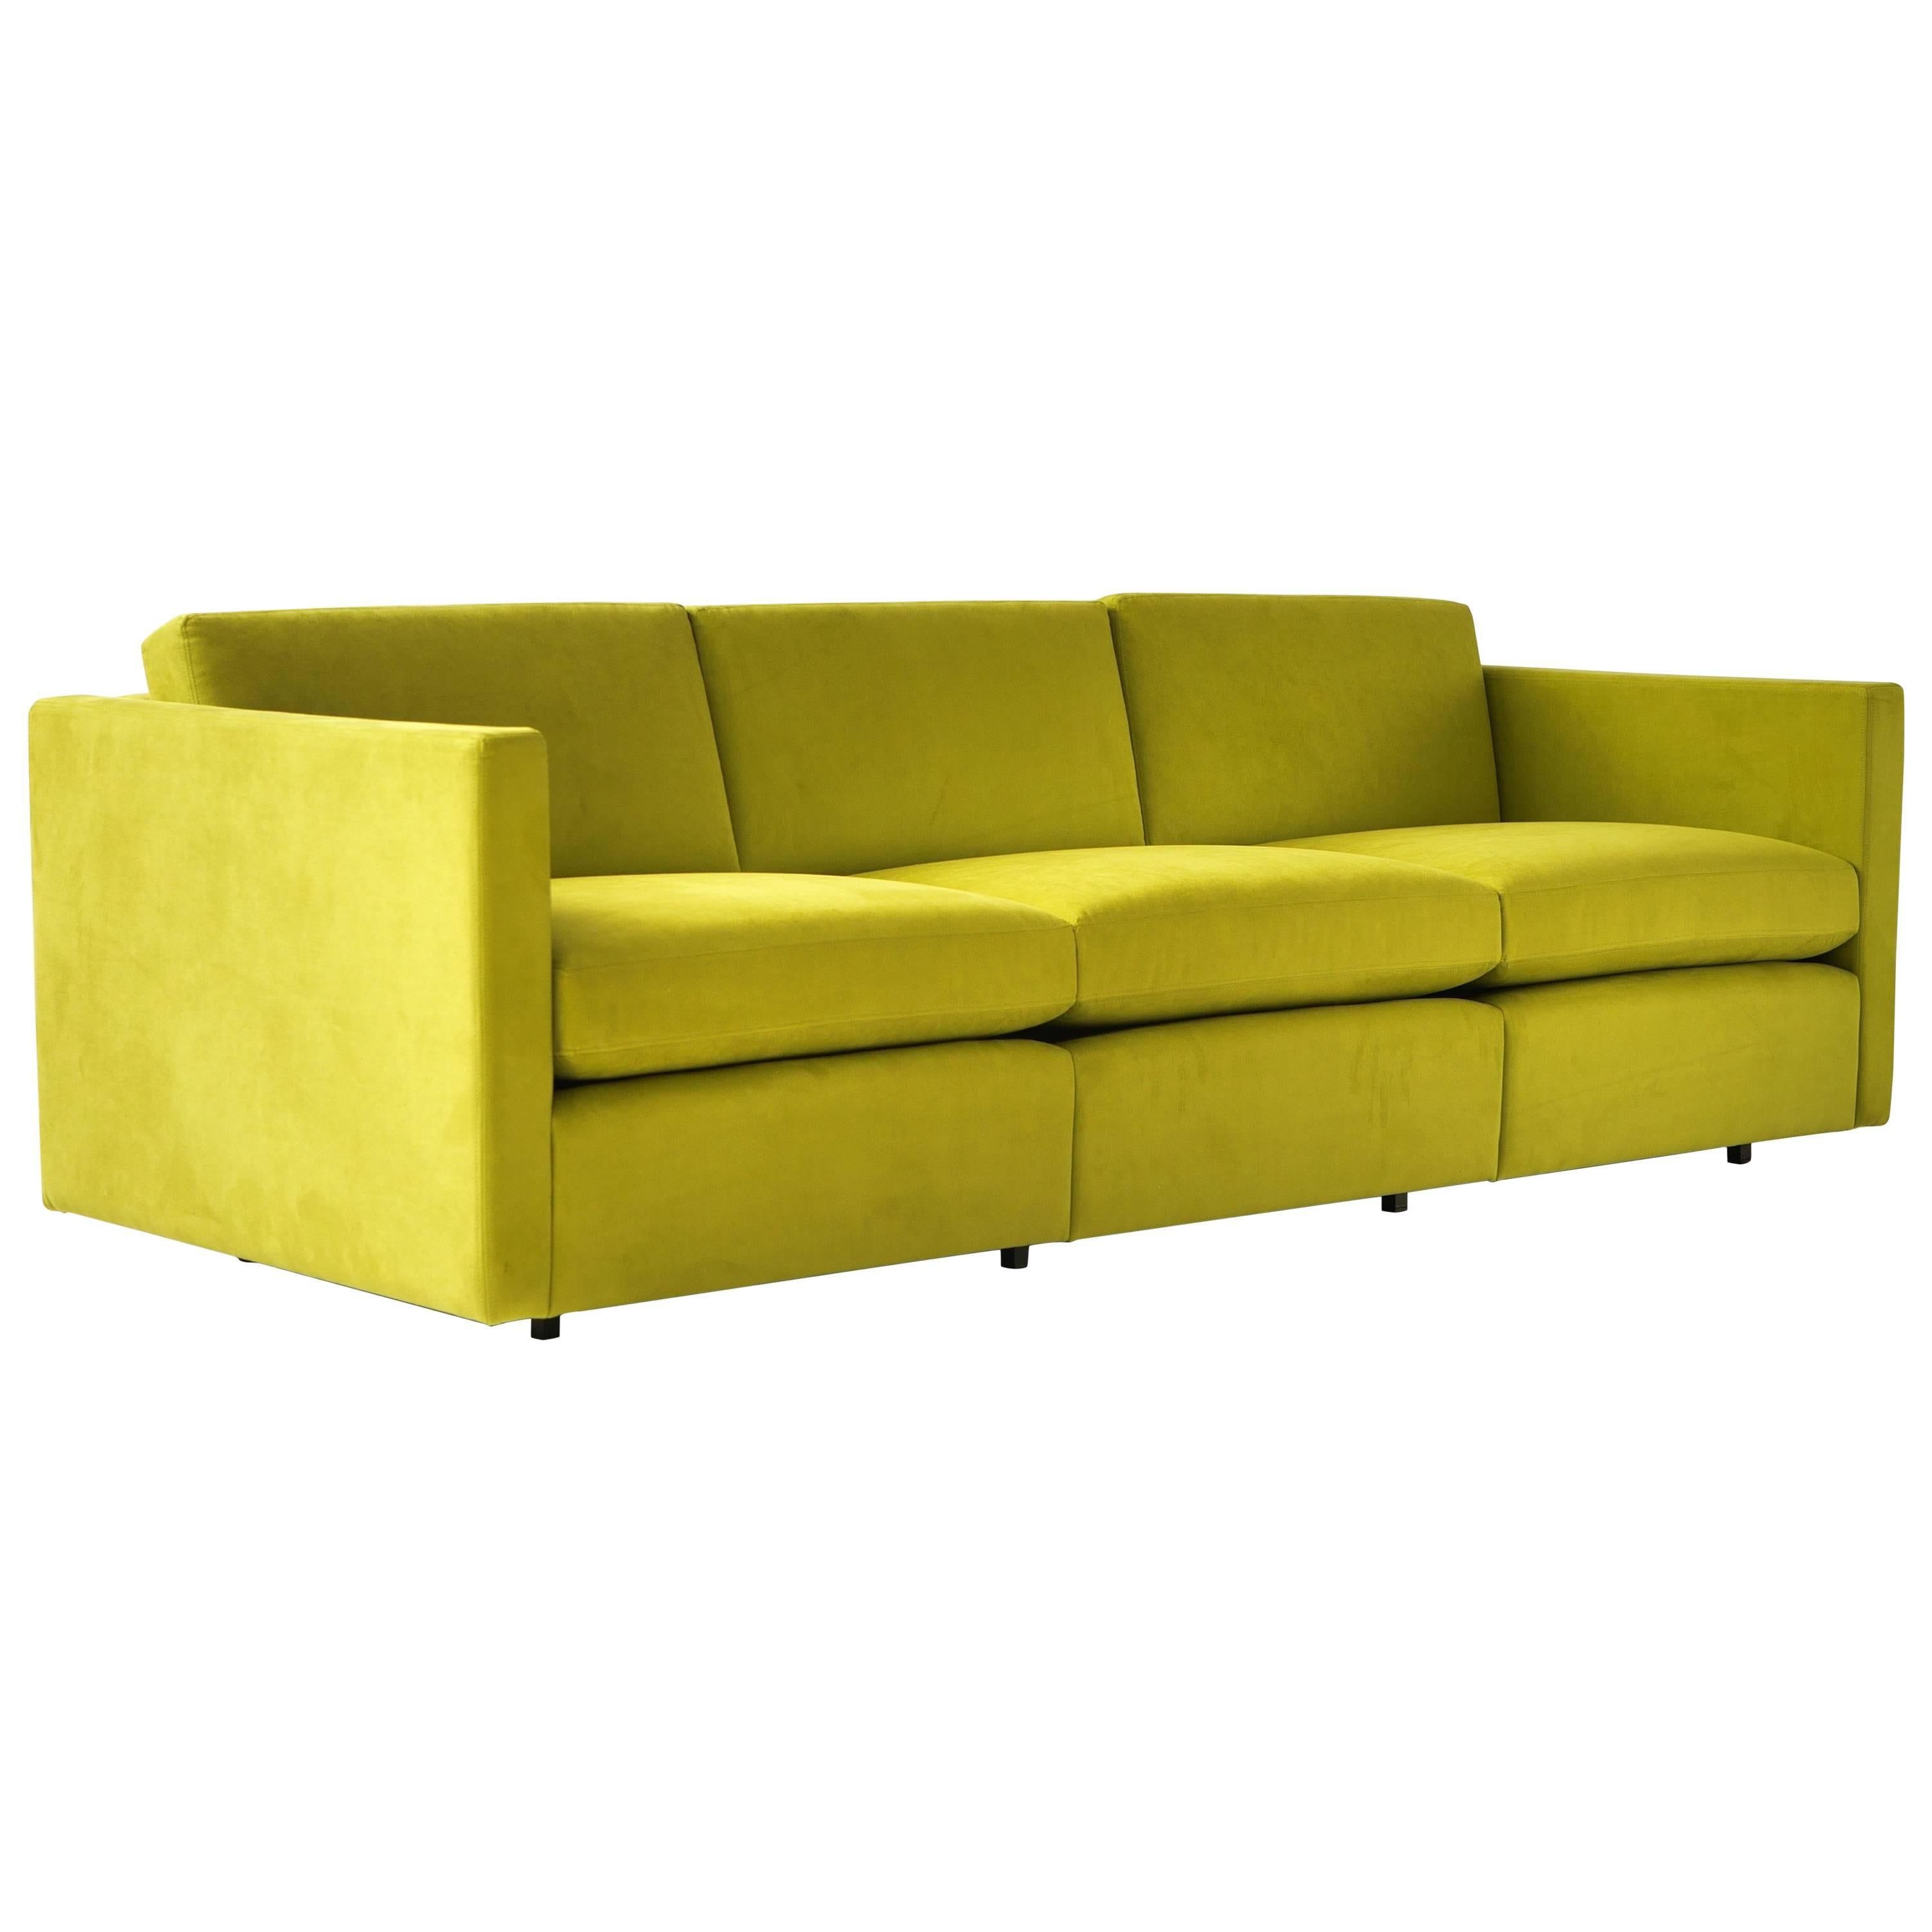 Charles Pfister designed this modular seating group for Knoll in 1980. Reupholstered in vibrant lime green ultrasuede.